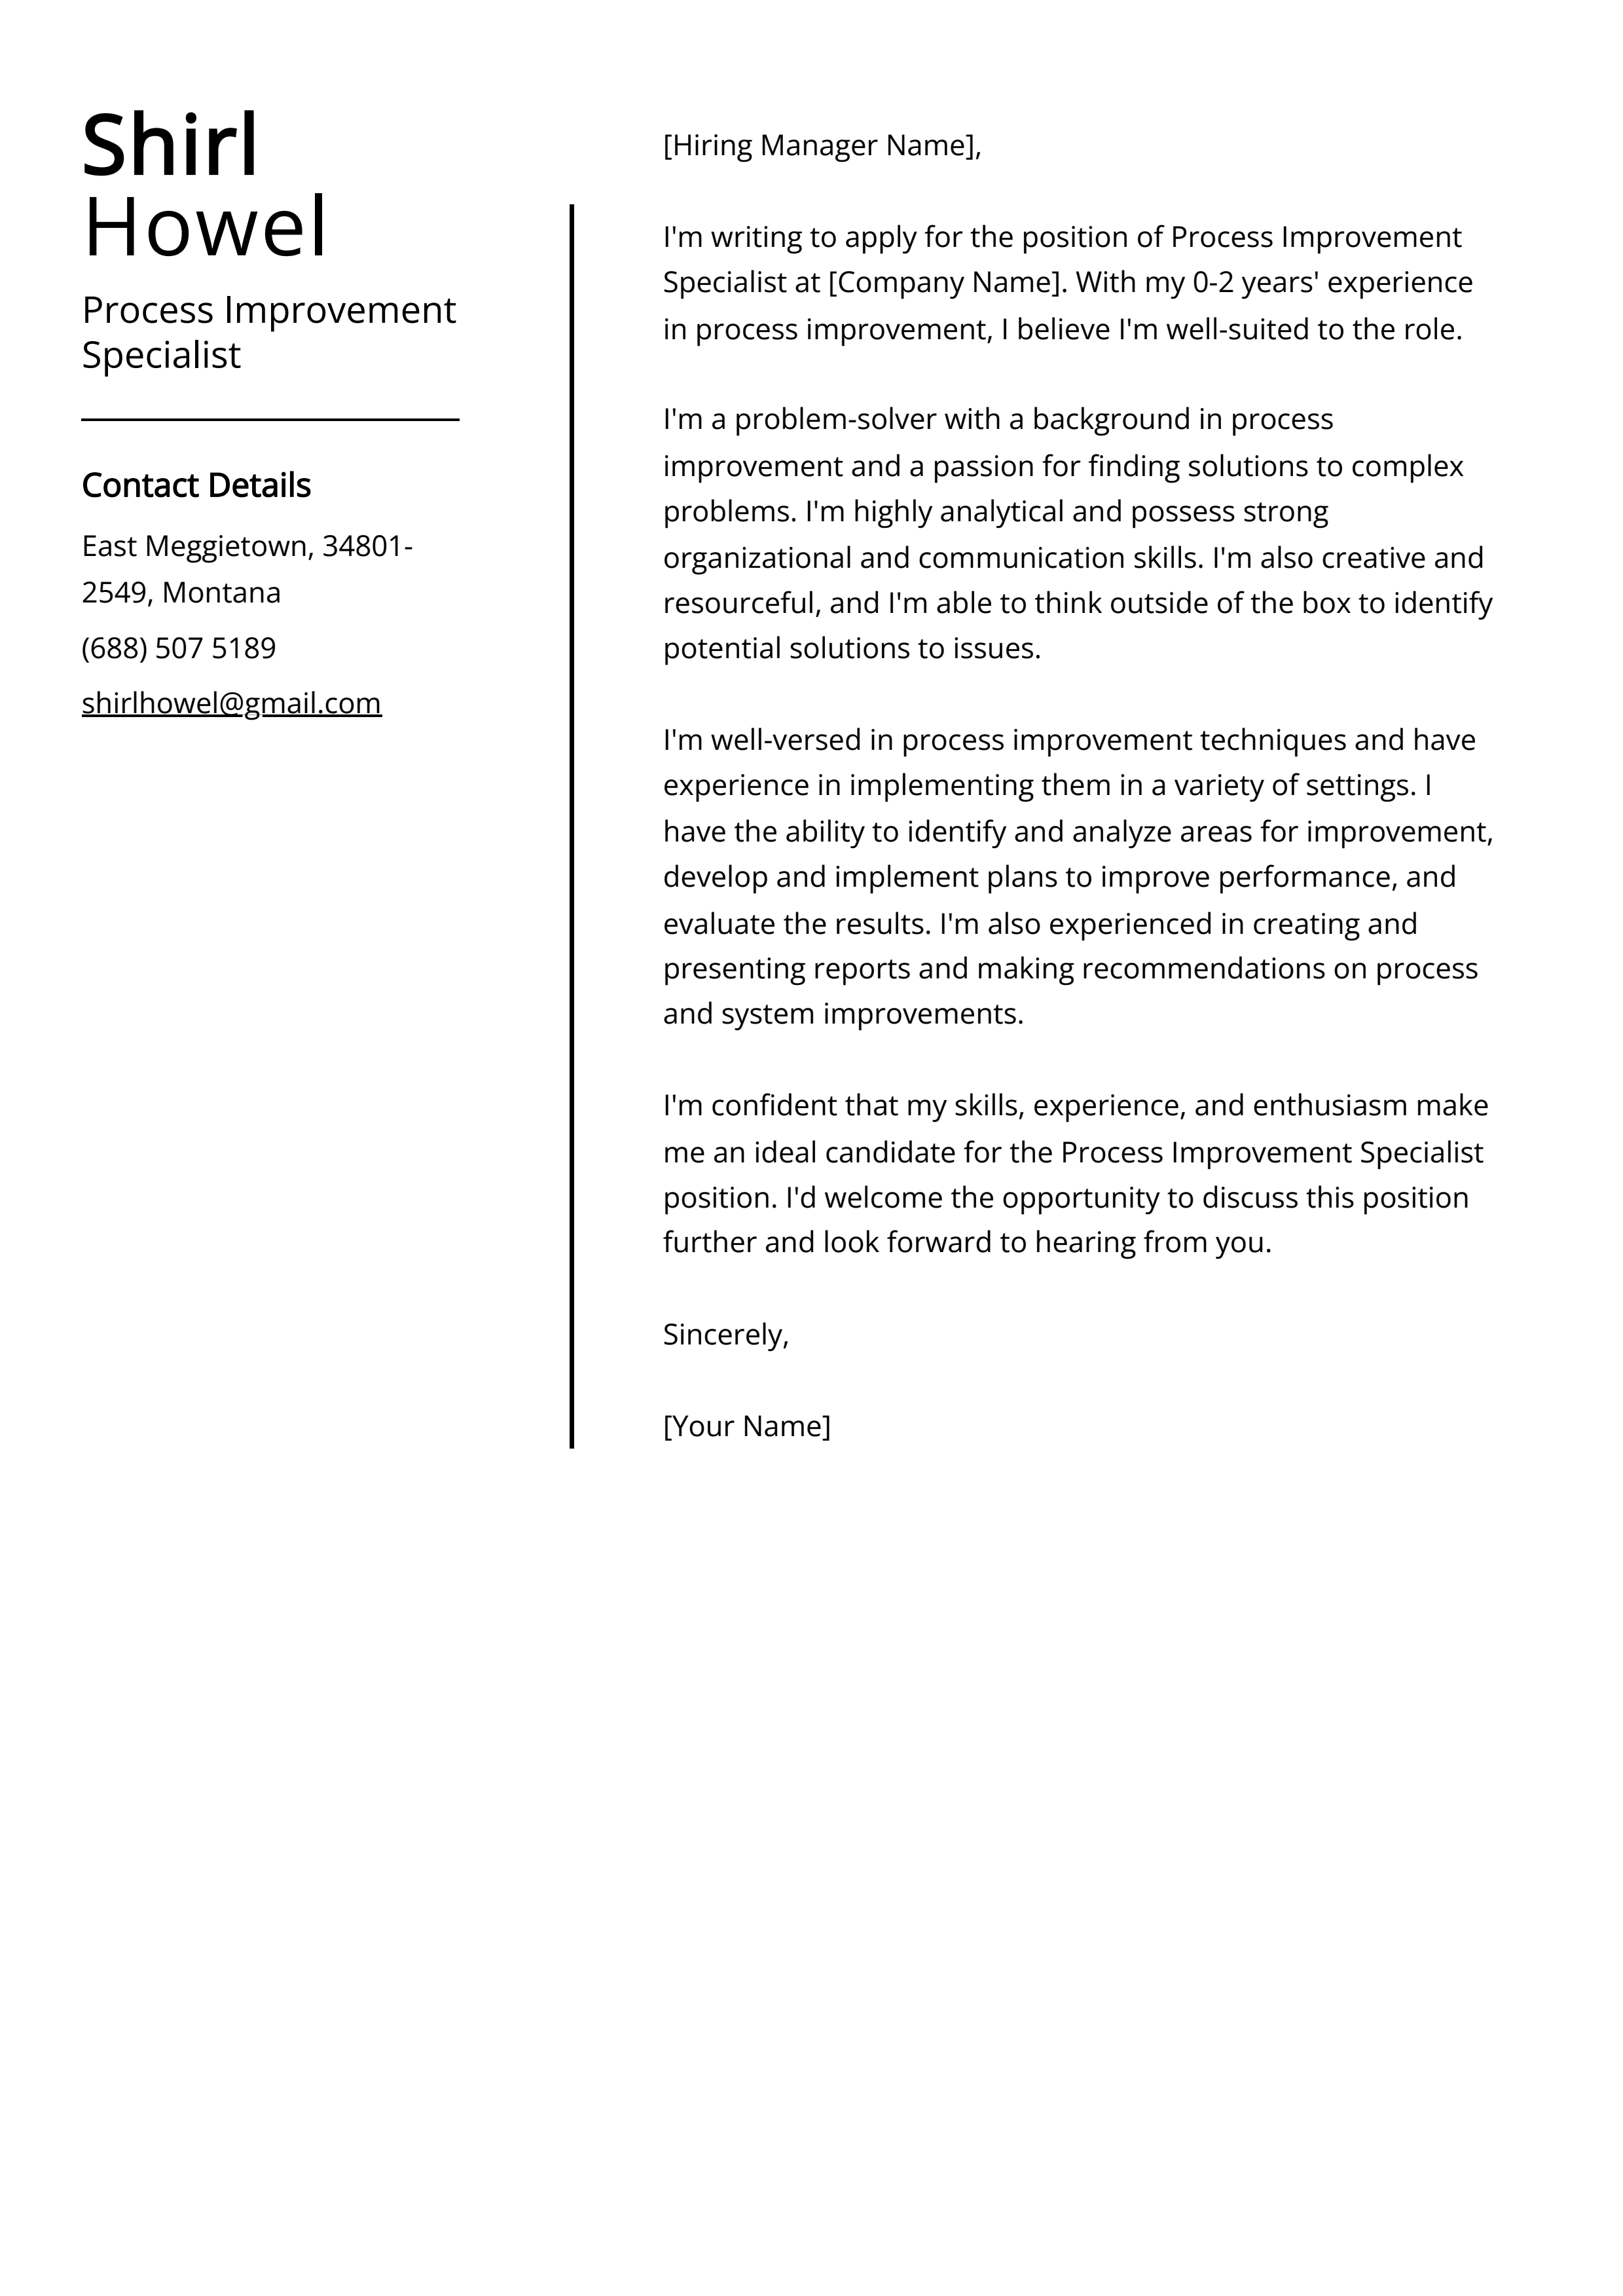 Process Improvement Specialist Cover Letter Example